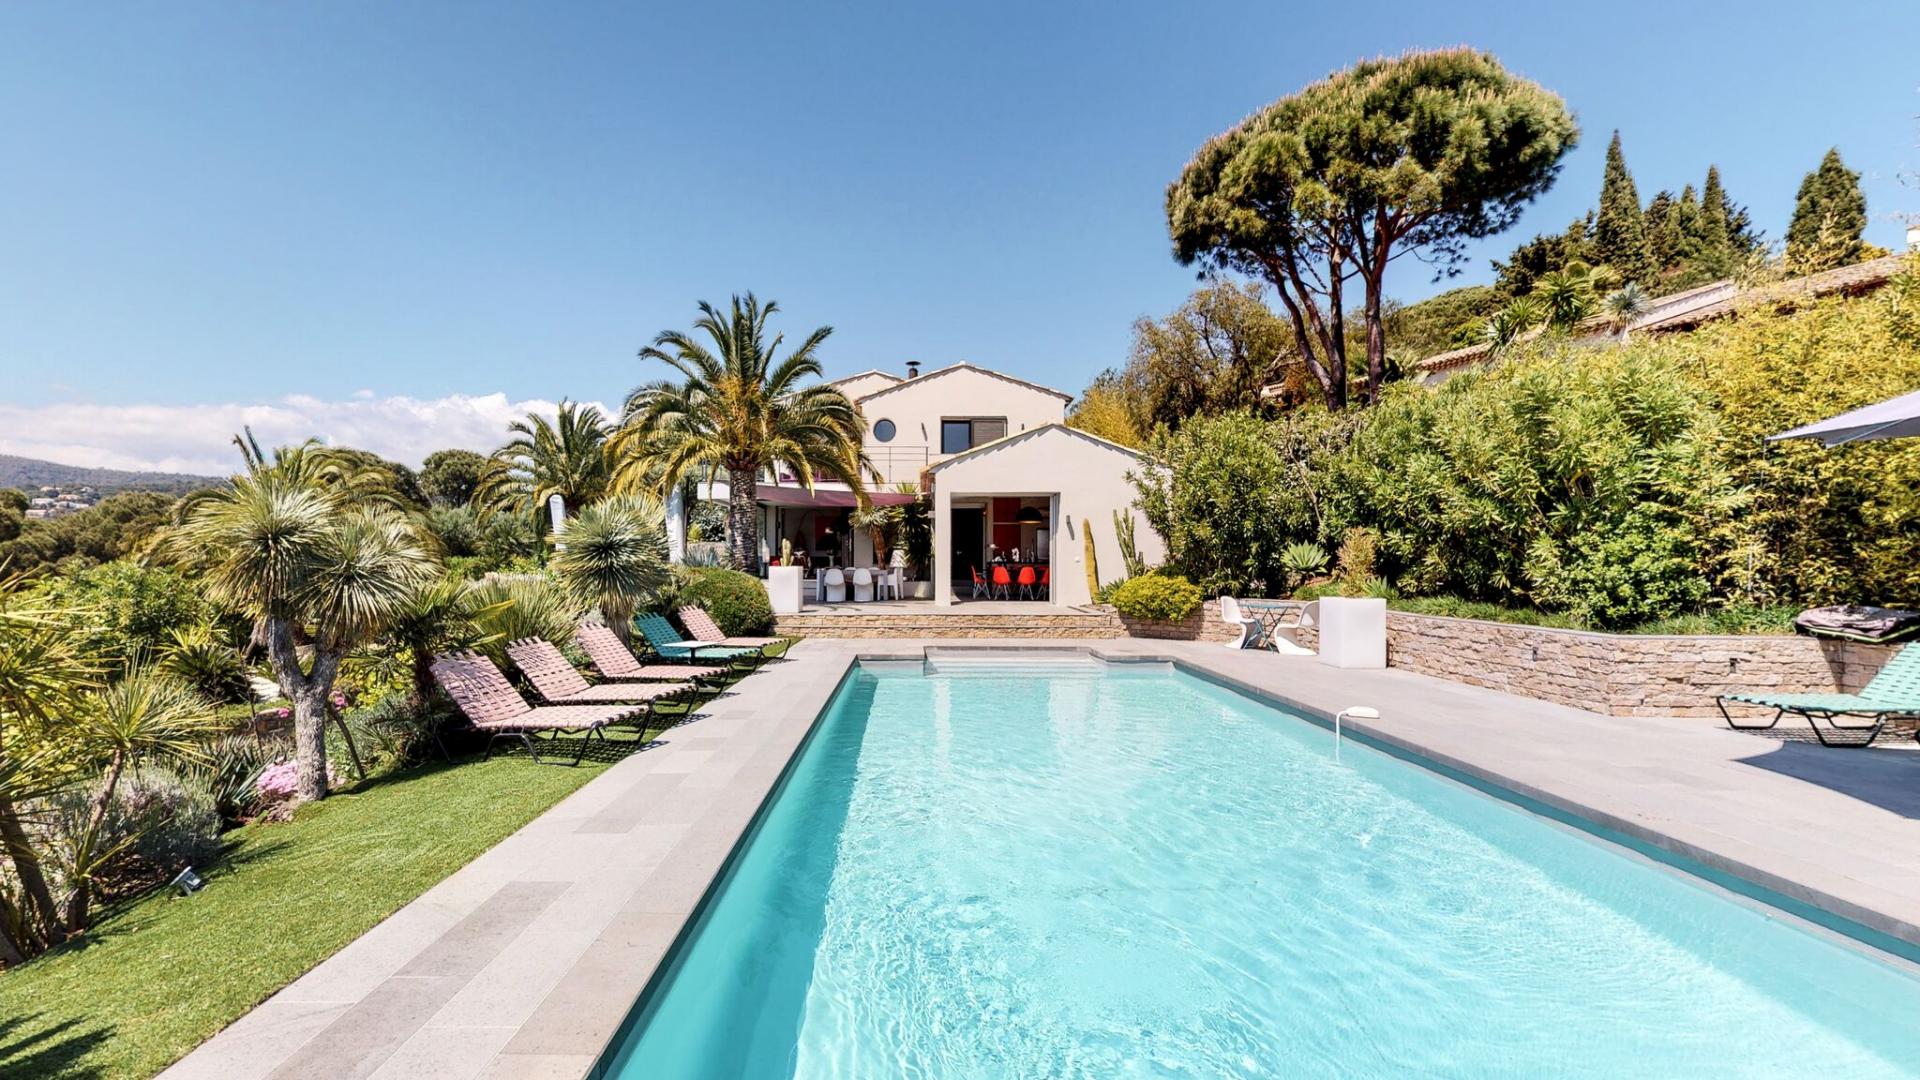 A MODERN VILLA FOR YOUR HOLIDAYS IN ST TROPEZ AREA